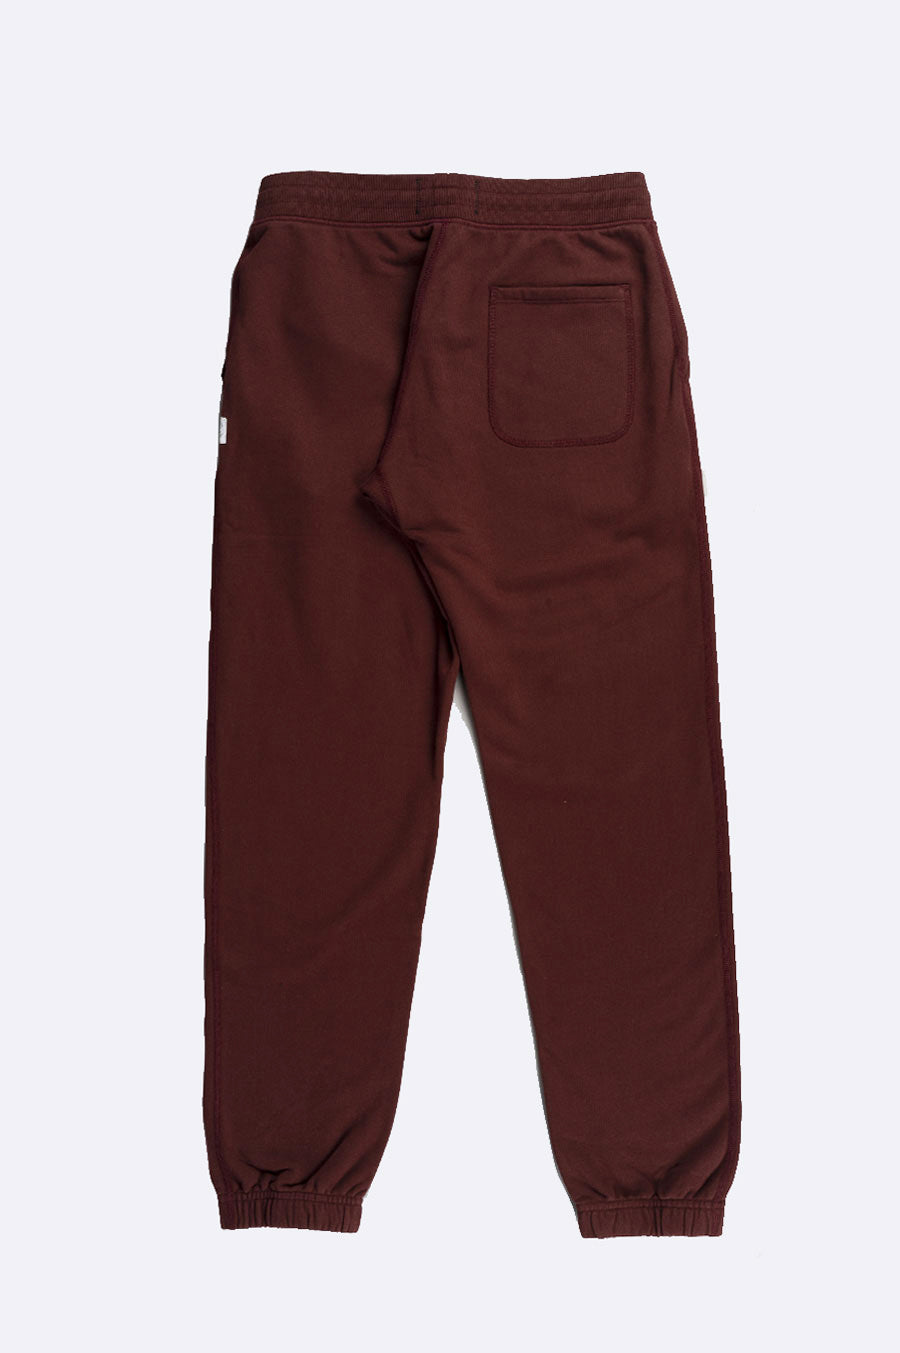 REIGNING CHAMP KNIT MIDWEIGHT TERRY CUFFED SWEATPANT CRIMSON